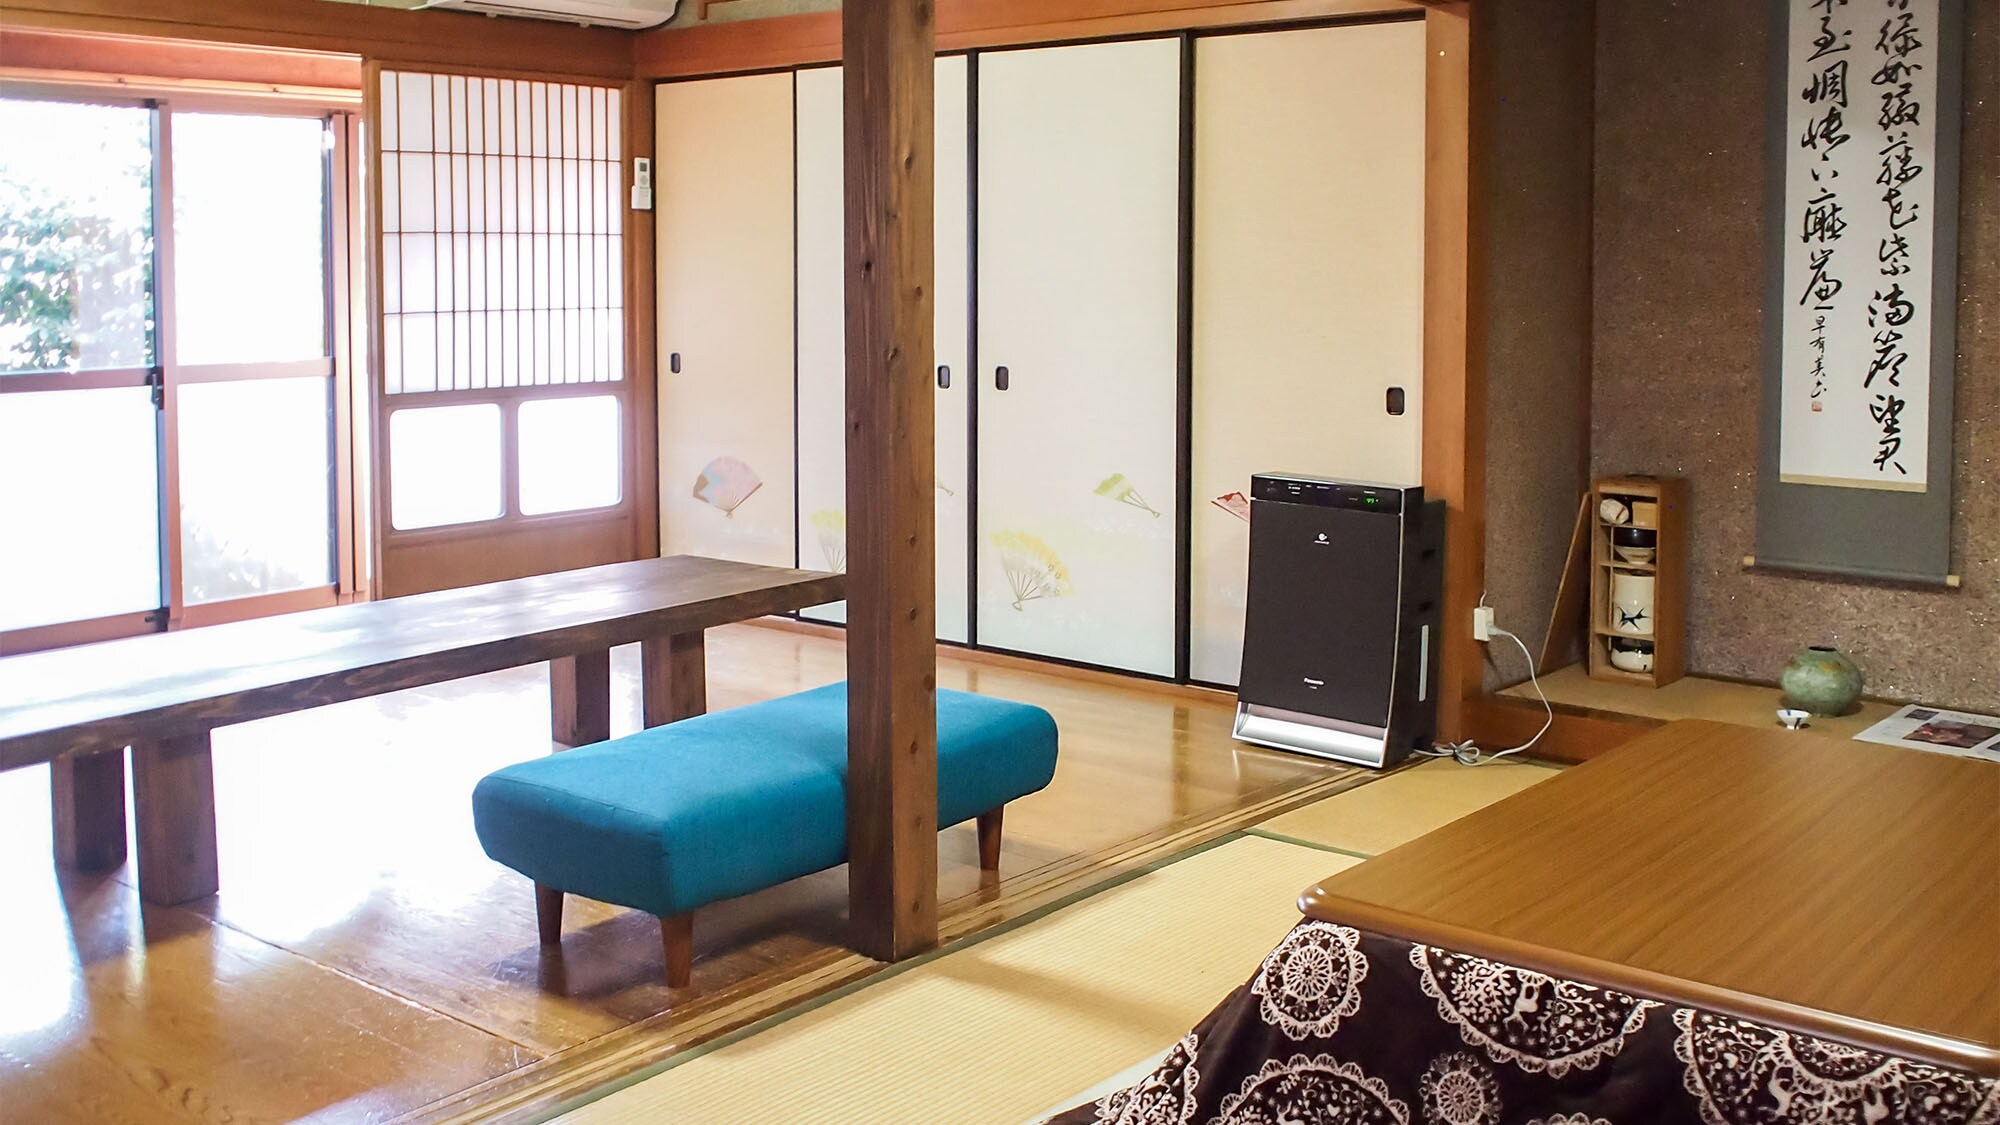 ・ The 20 tatami mat living room has a desk and a kotatsu, which can be used as a place for communication.